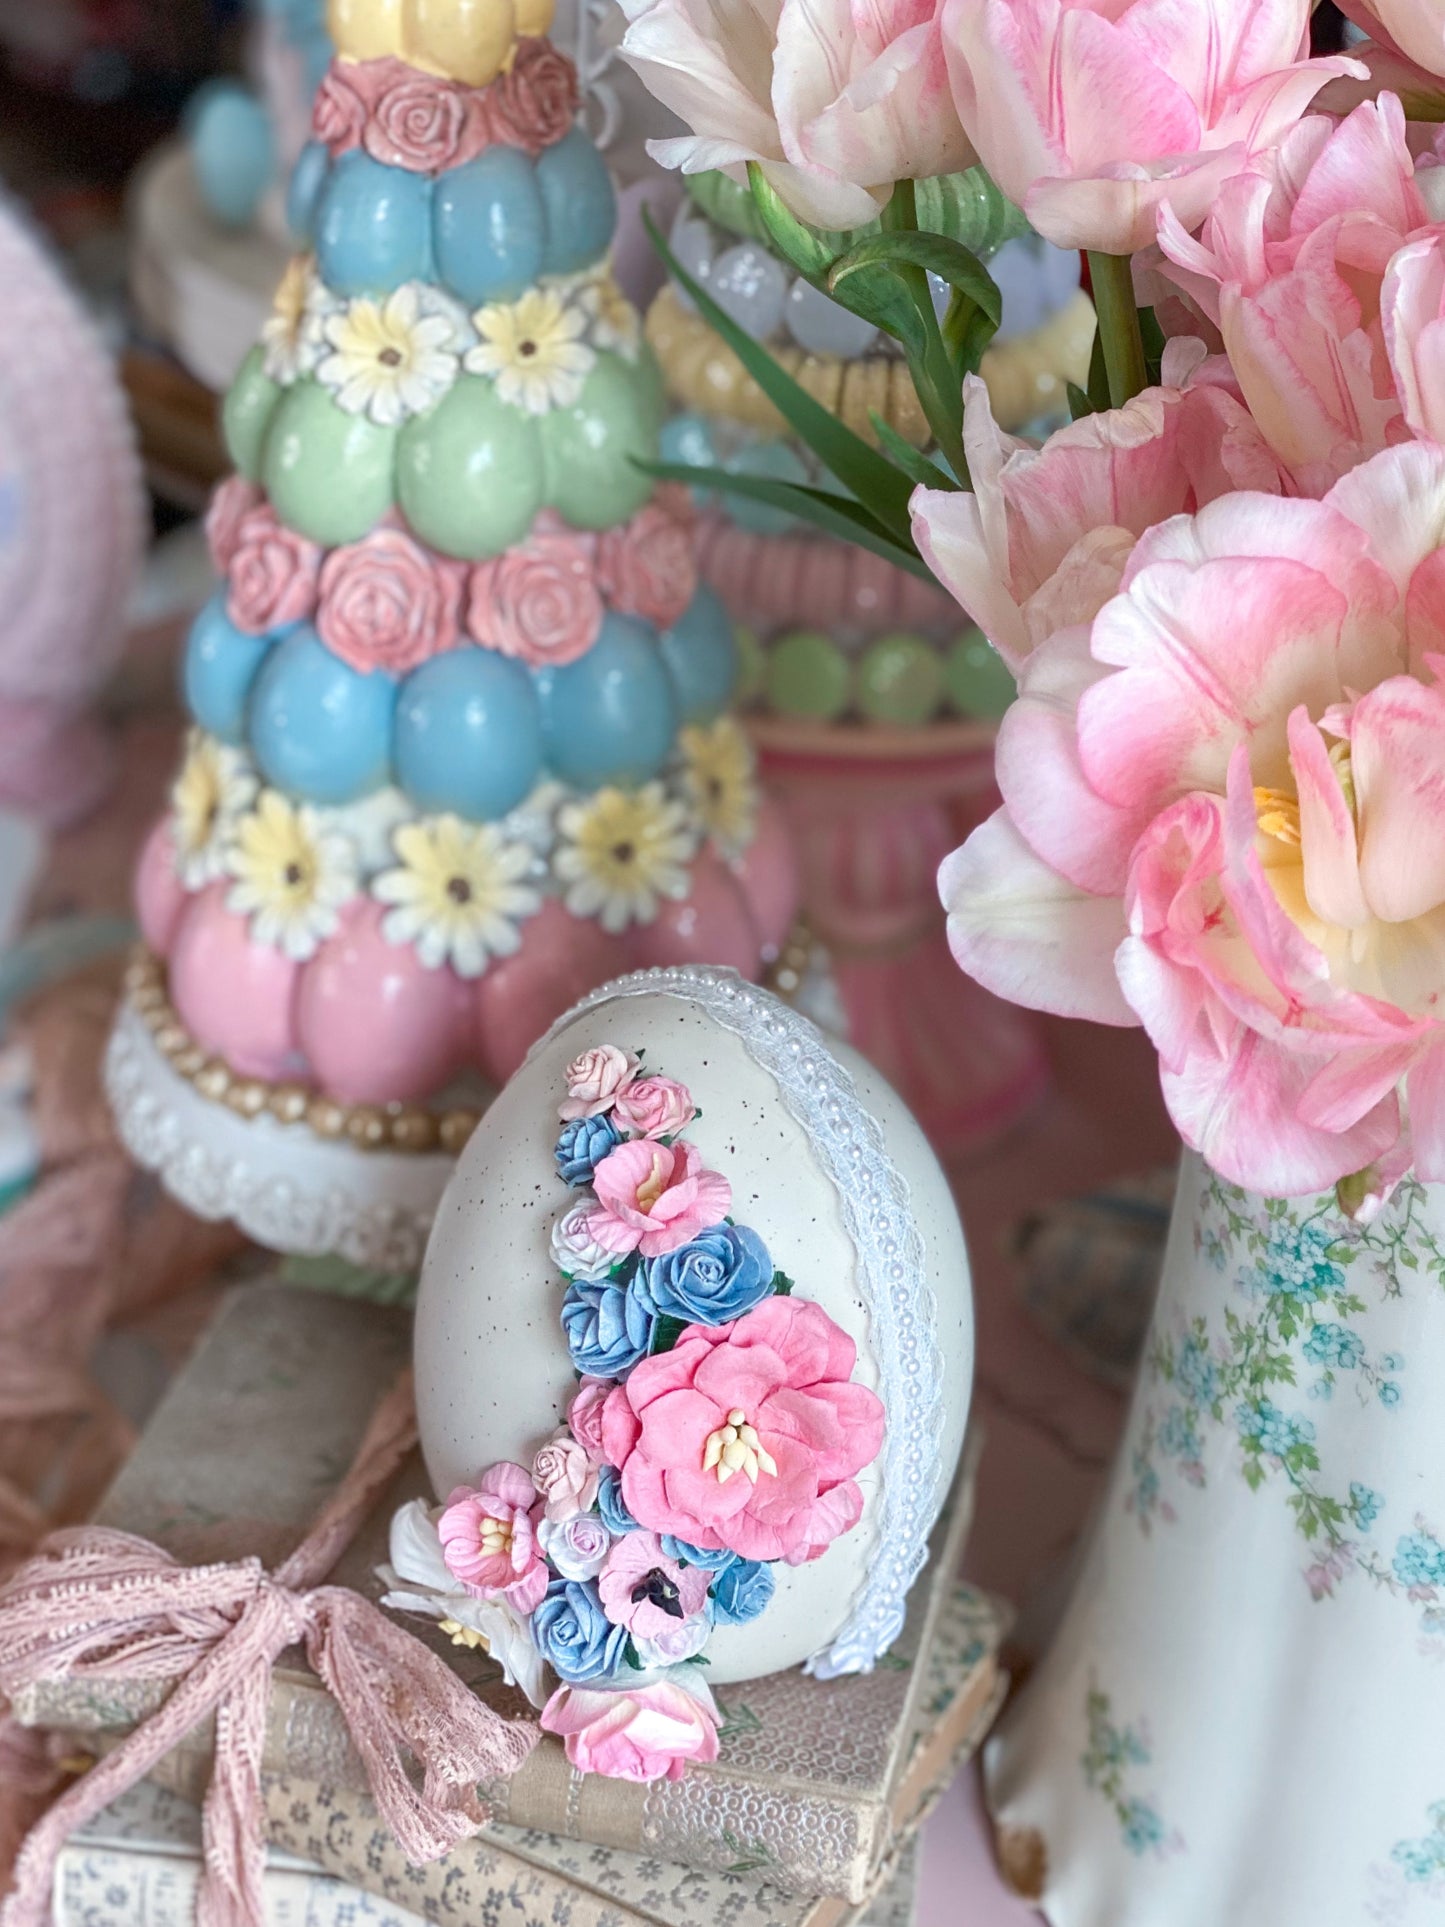 Bespoke Decorative Egg with Pink and Blue Floral Design